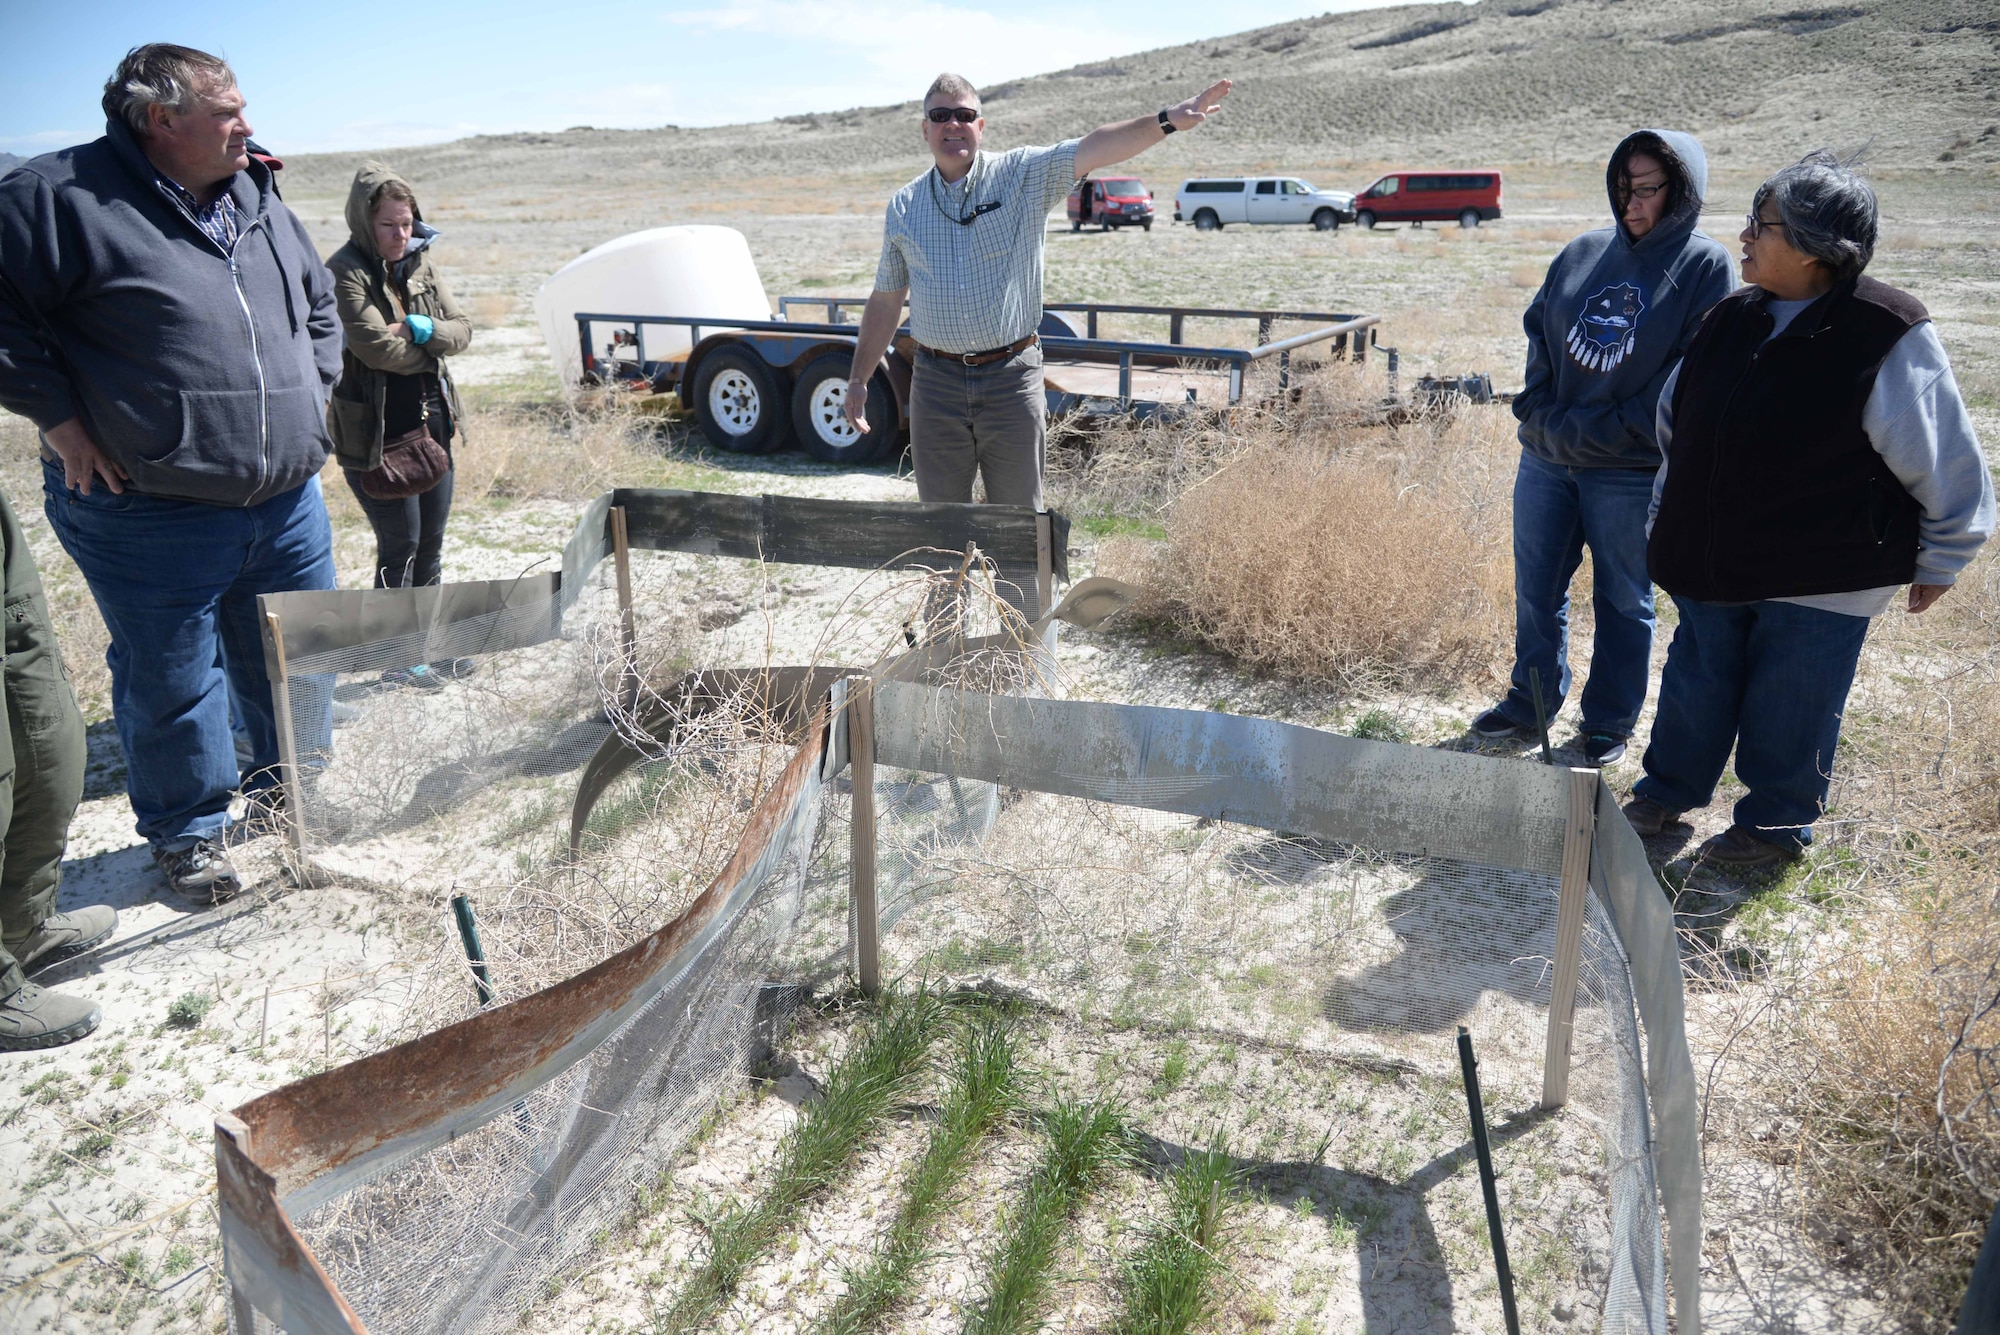 Russ Lawrence, Natural Resources Manager at the Utah Test and Training Range, discsses how the UTTR is gradually working on getting rid of cheat grass and cultivating more natural growth of better and nutritious vegetation for the land and wildlife. The exchange occurred on a tour of the range April 20, 2018, during Annual American Indian Meeting, in which Hill Air Force Base was a co-host. The meeting was held for government-to-government conversations, tours of UTTR, and official tribal co-host presentations. (U.S. Air Force photo by Cynthia Griggs)